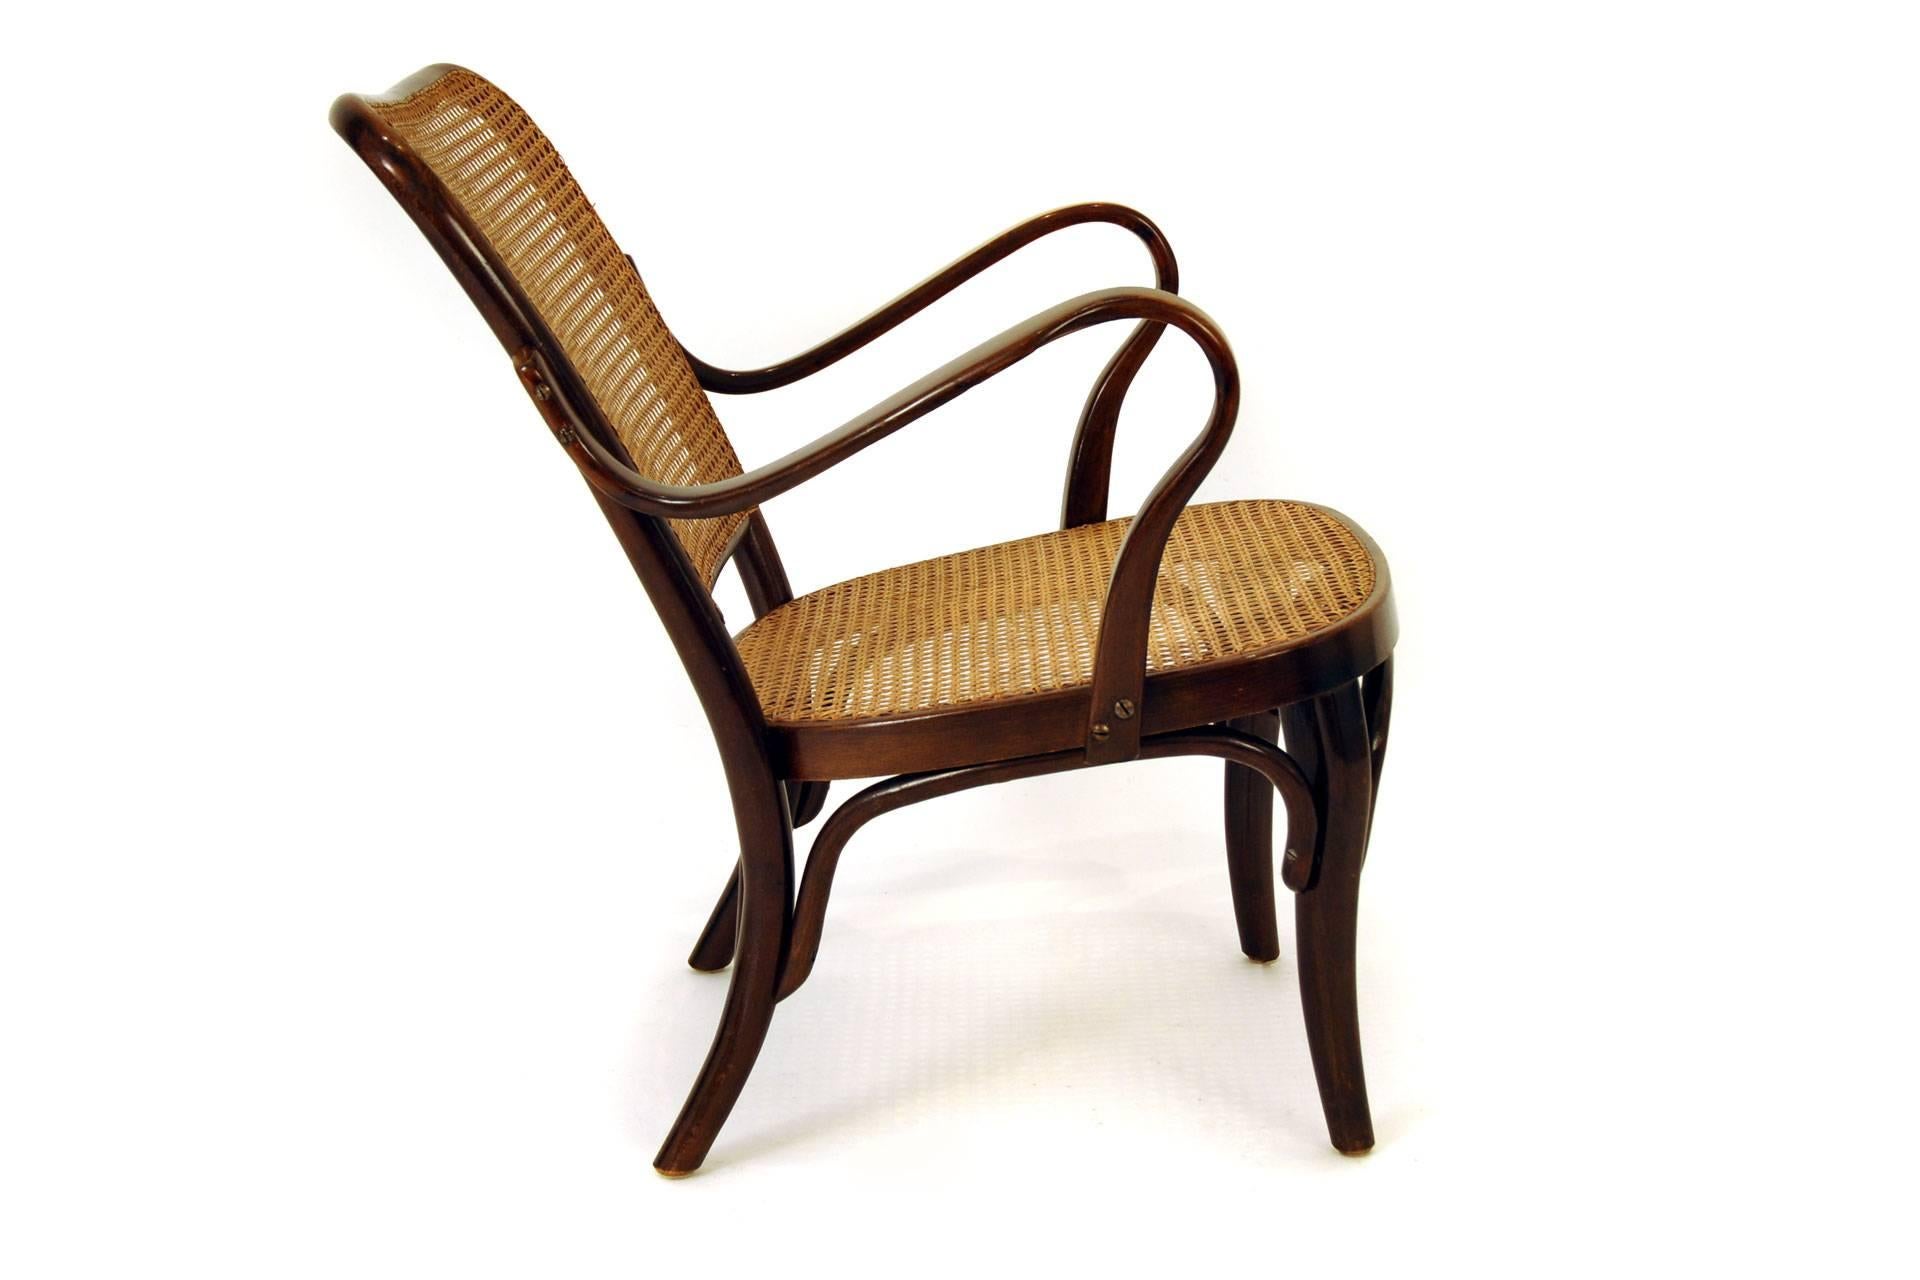 The armchair was designed by Josef Frank in 1930s The model name is Kaminfauteuil A. 752. It was manufactured by Thonet. The furniture frame is made of bent beech which is stained. The network is probably renewed and in very good condition. There